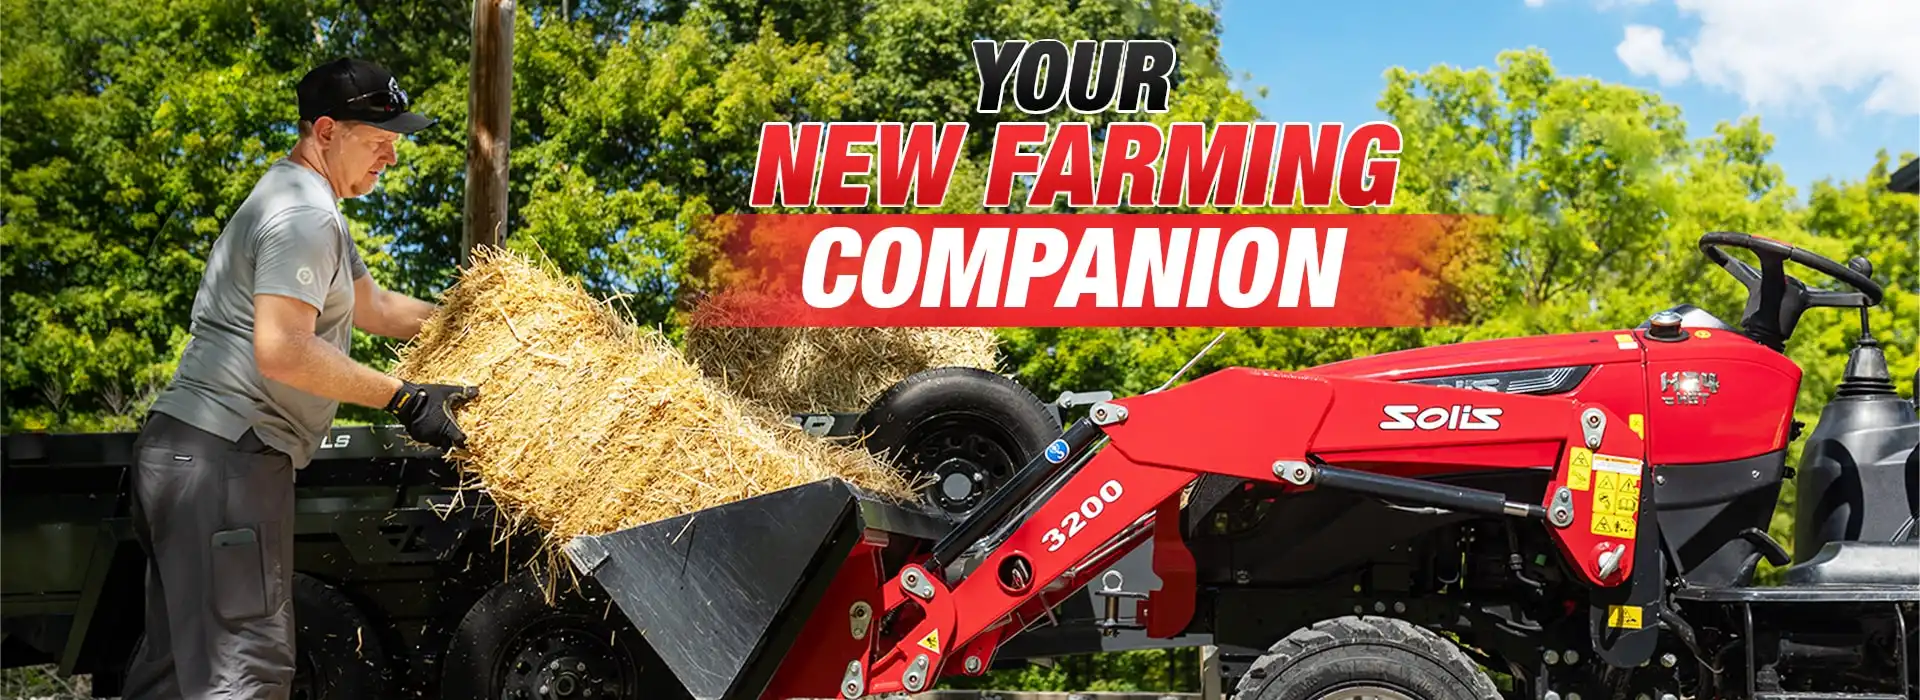 Get-Ready-to-Meet-Your-New-Farming-Companion-‘The-Solis-Tractor